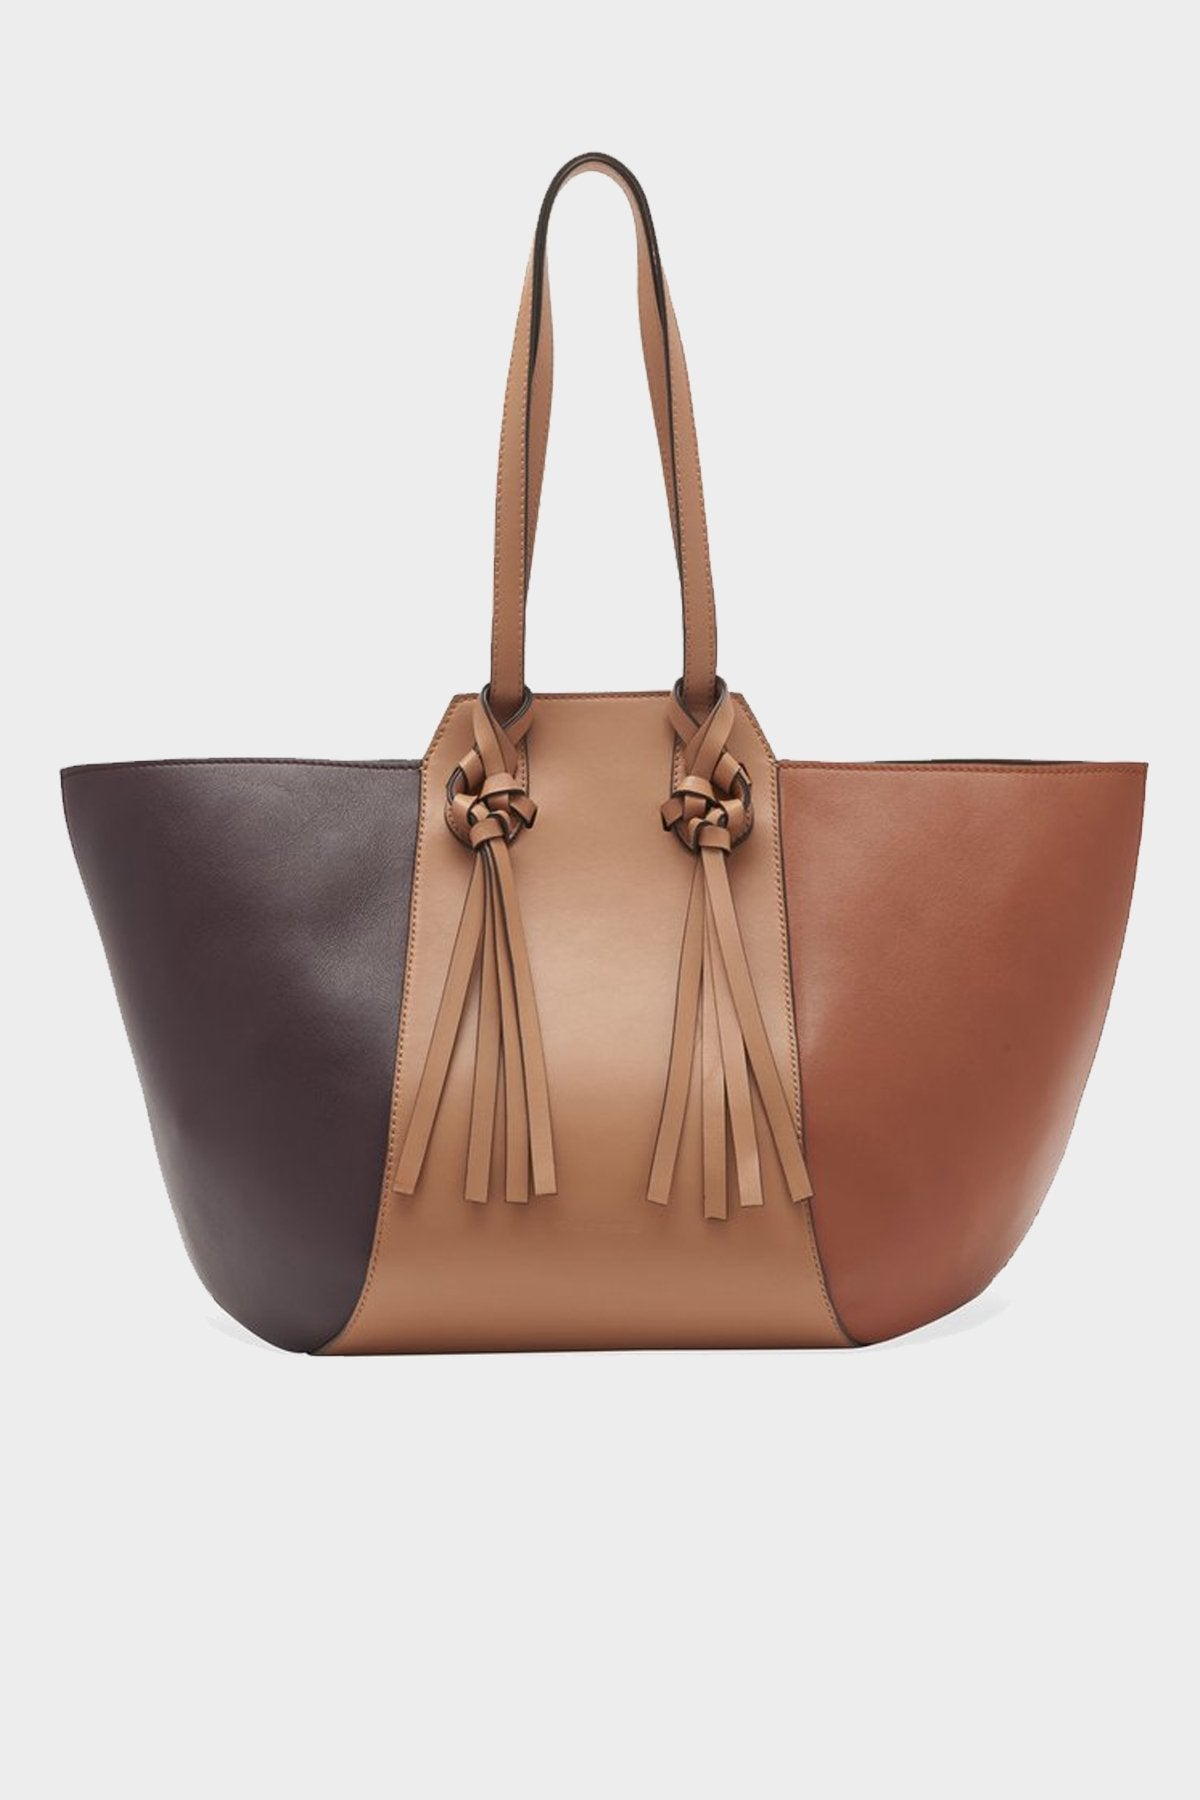 Imogen Large Carryall Tote in Terracota Patchwork - shop-olivia.com